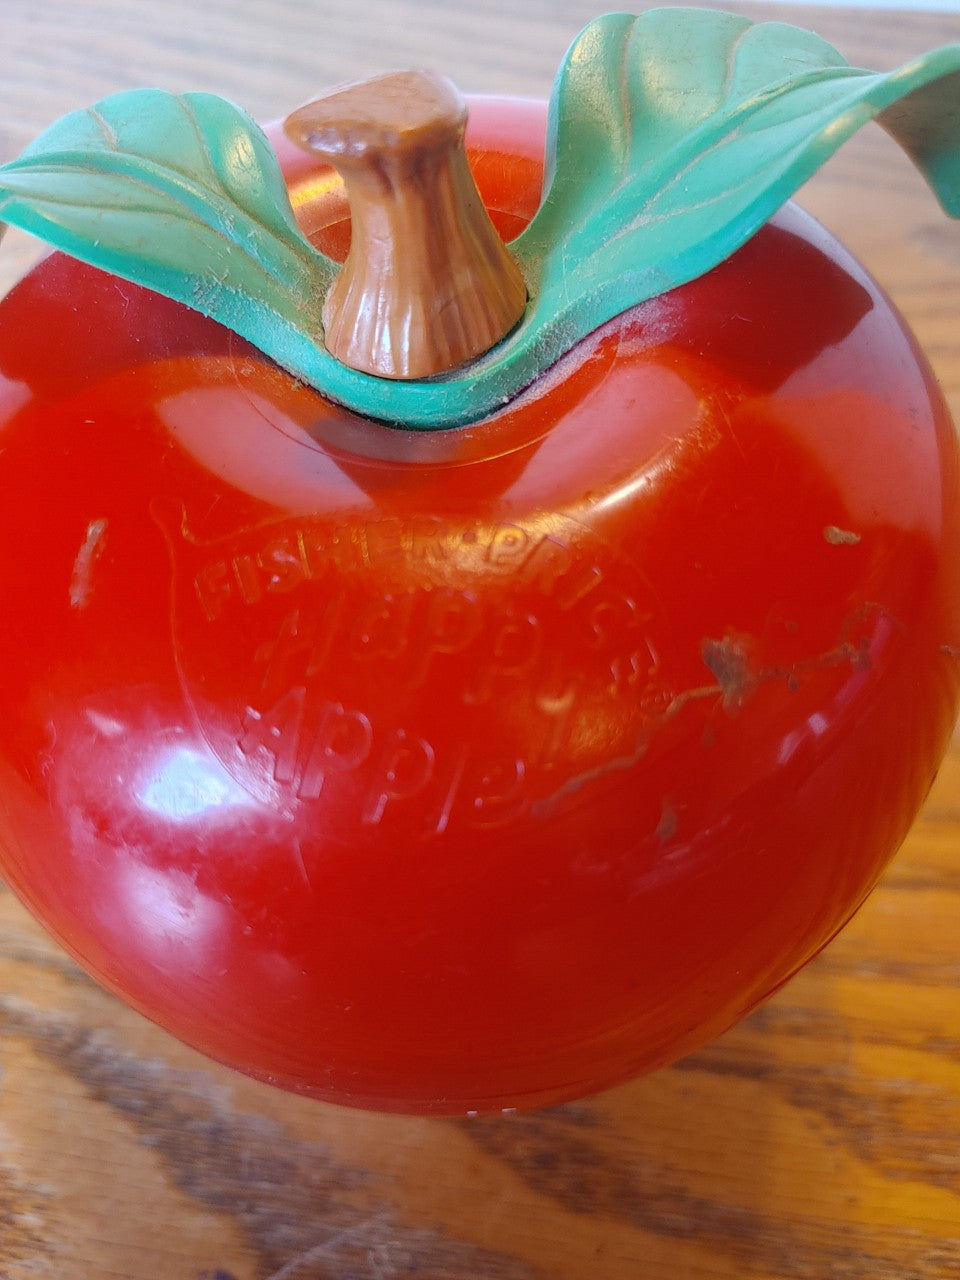 An Apple A day...! Vintage Happy Apple Fisher Price Toy Roly Poly Chime 1972